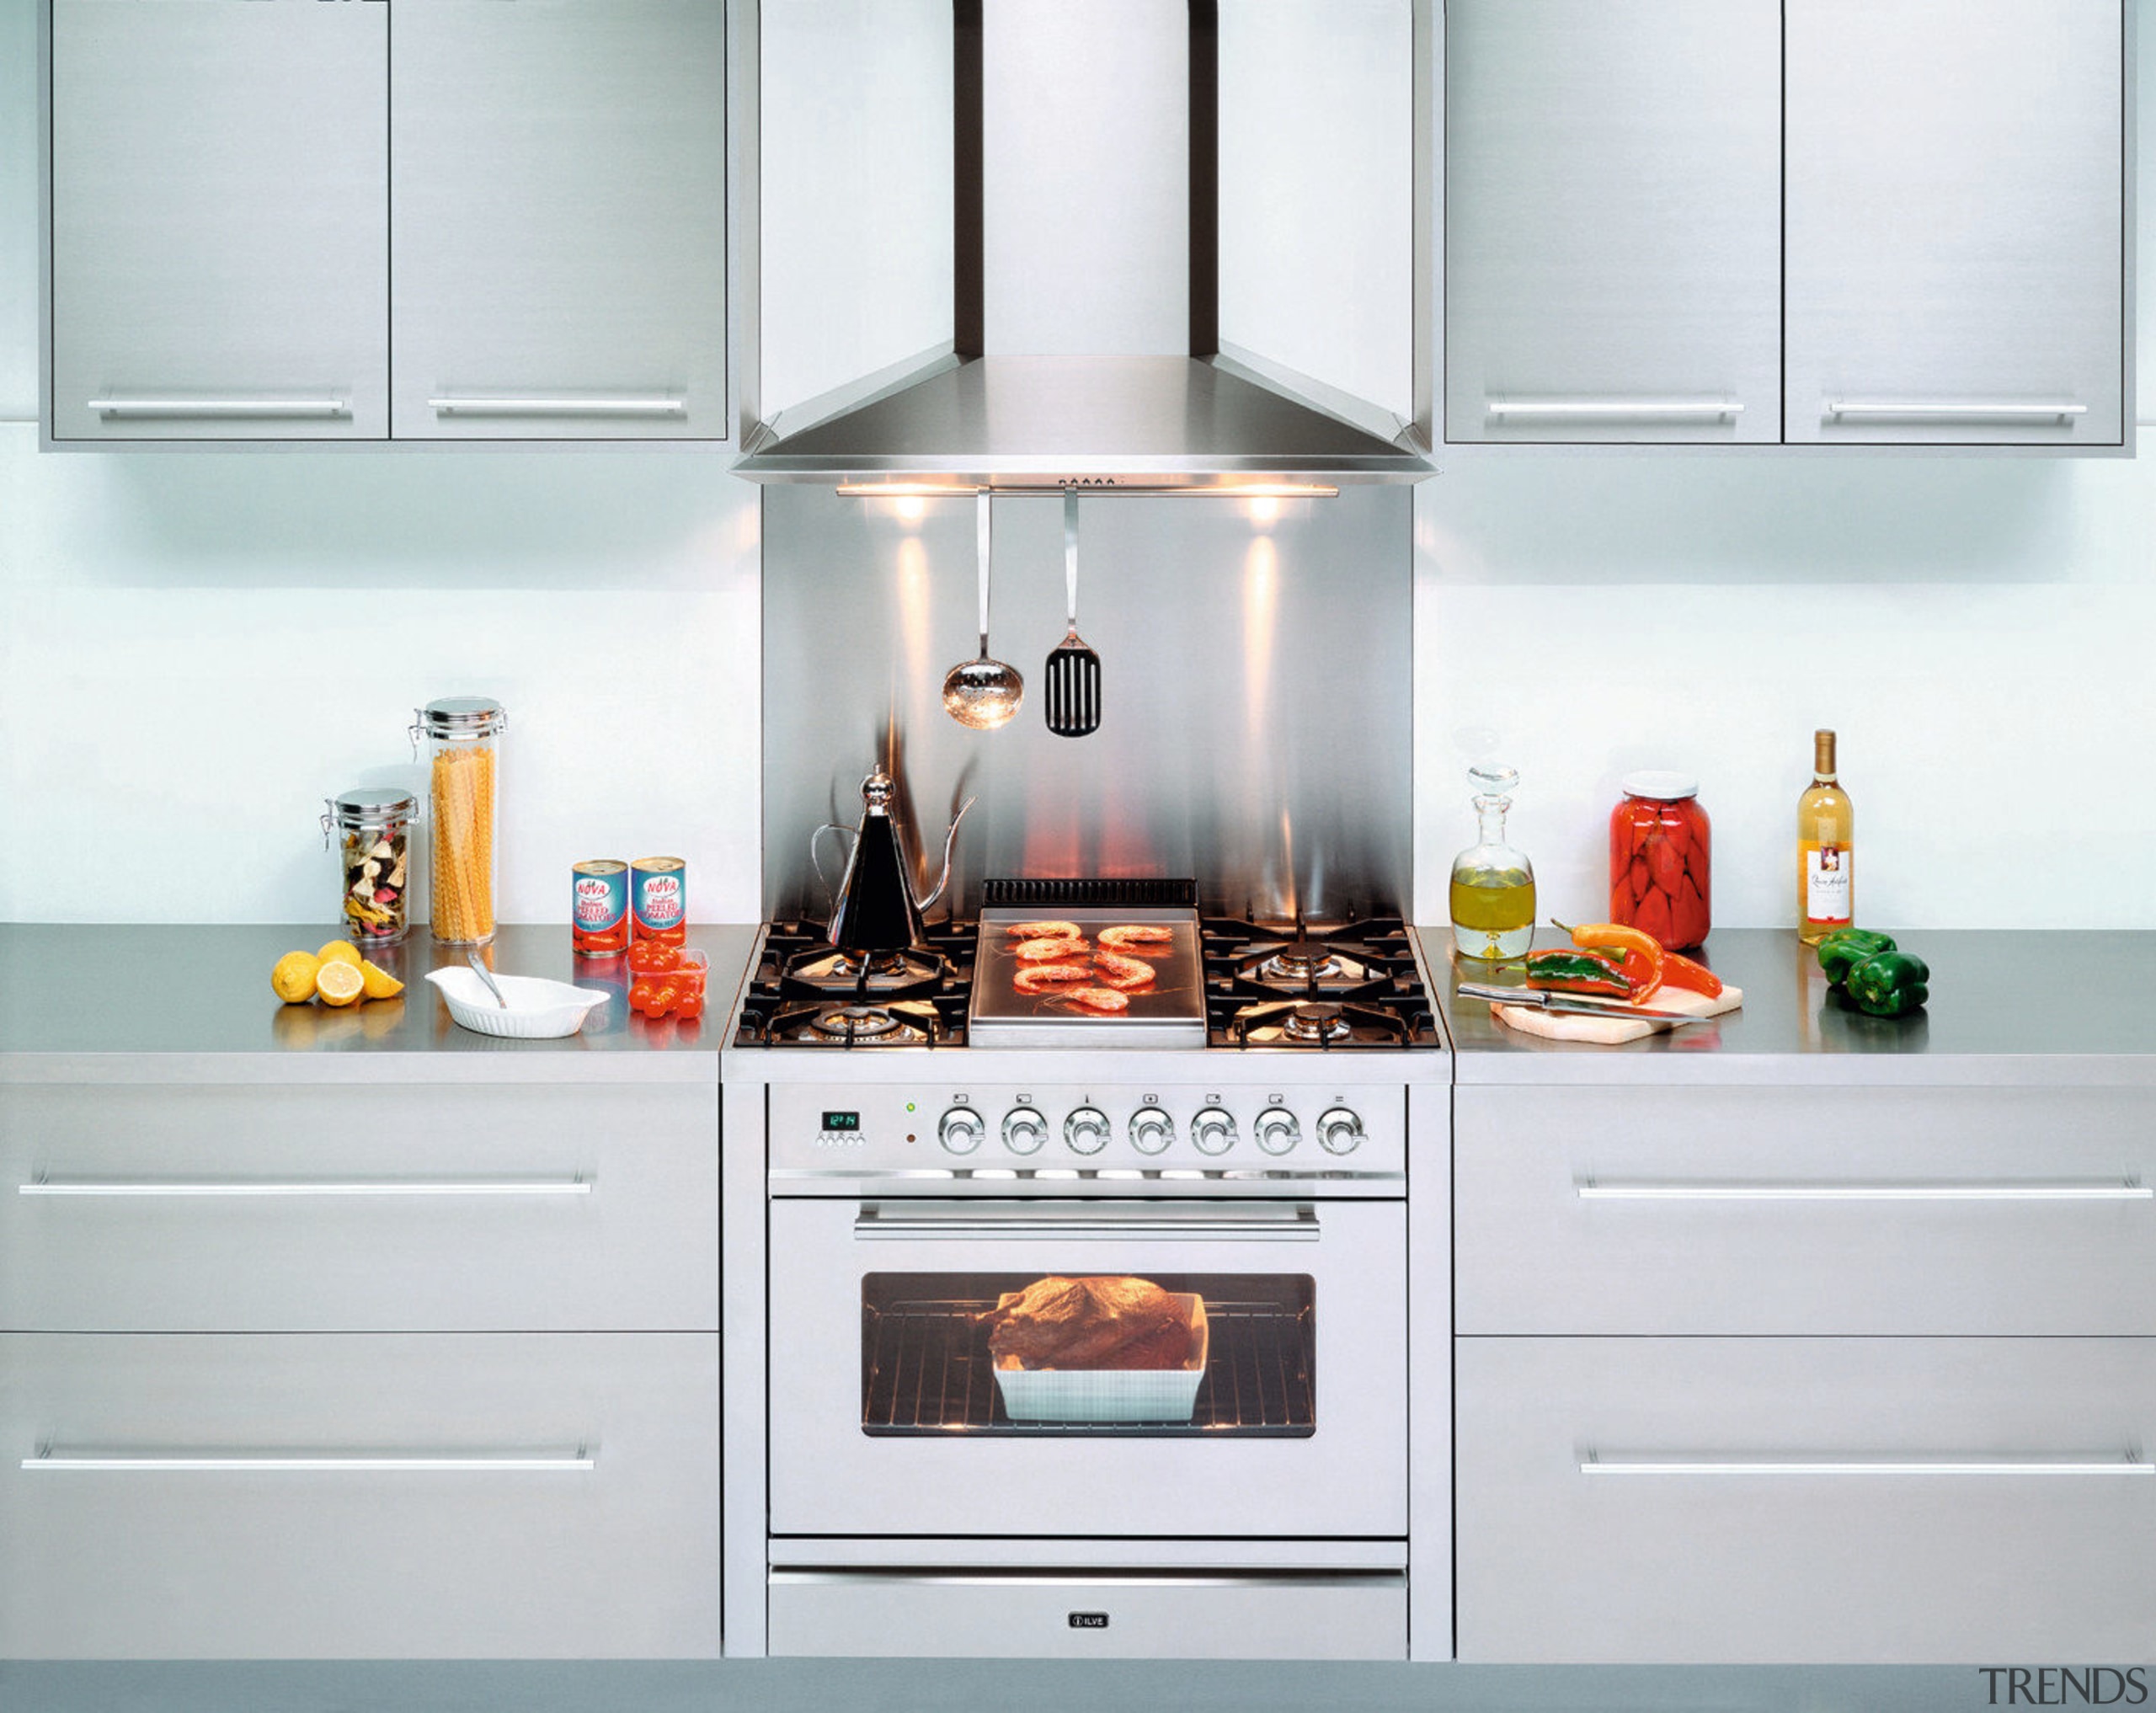 Ilve's Quadra and Nostalgie gas ovens offer expansive cabinetry, countertop, cuisine classique, gas stove, home appliance, interior design, kitchen, kitchen appliance, kitchen stove, major appliance, refrigerator, room, small appliance, white